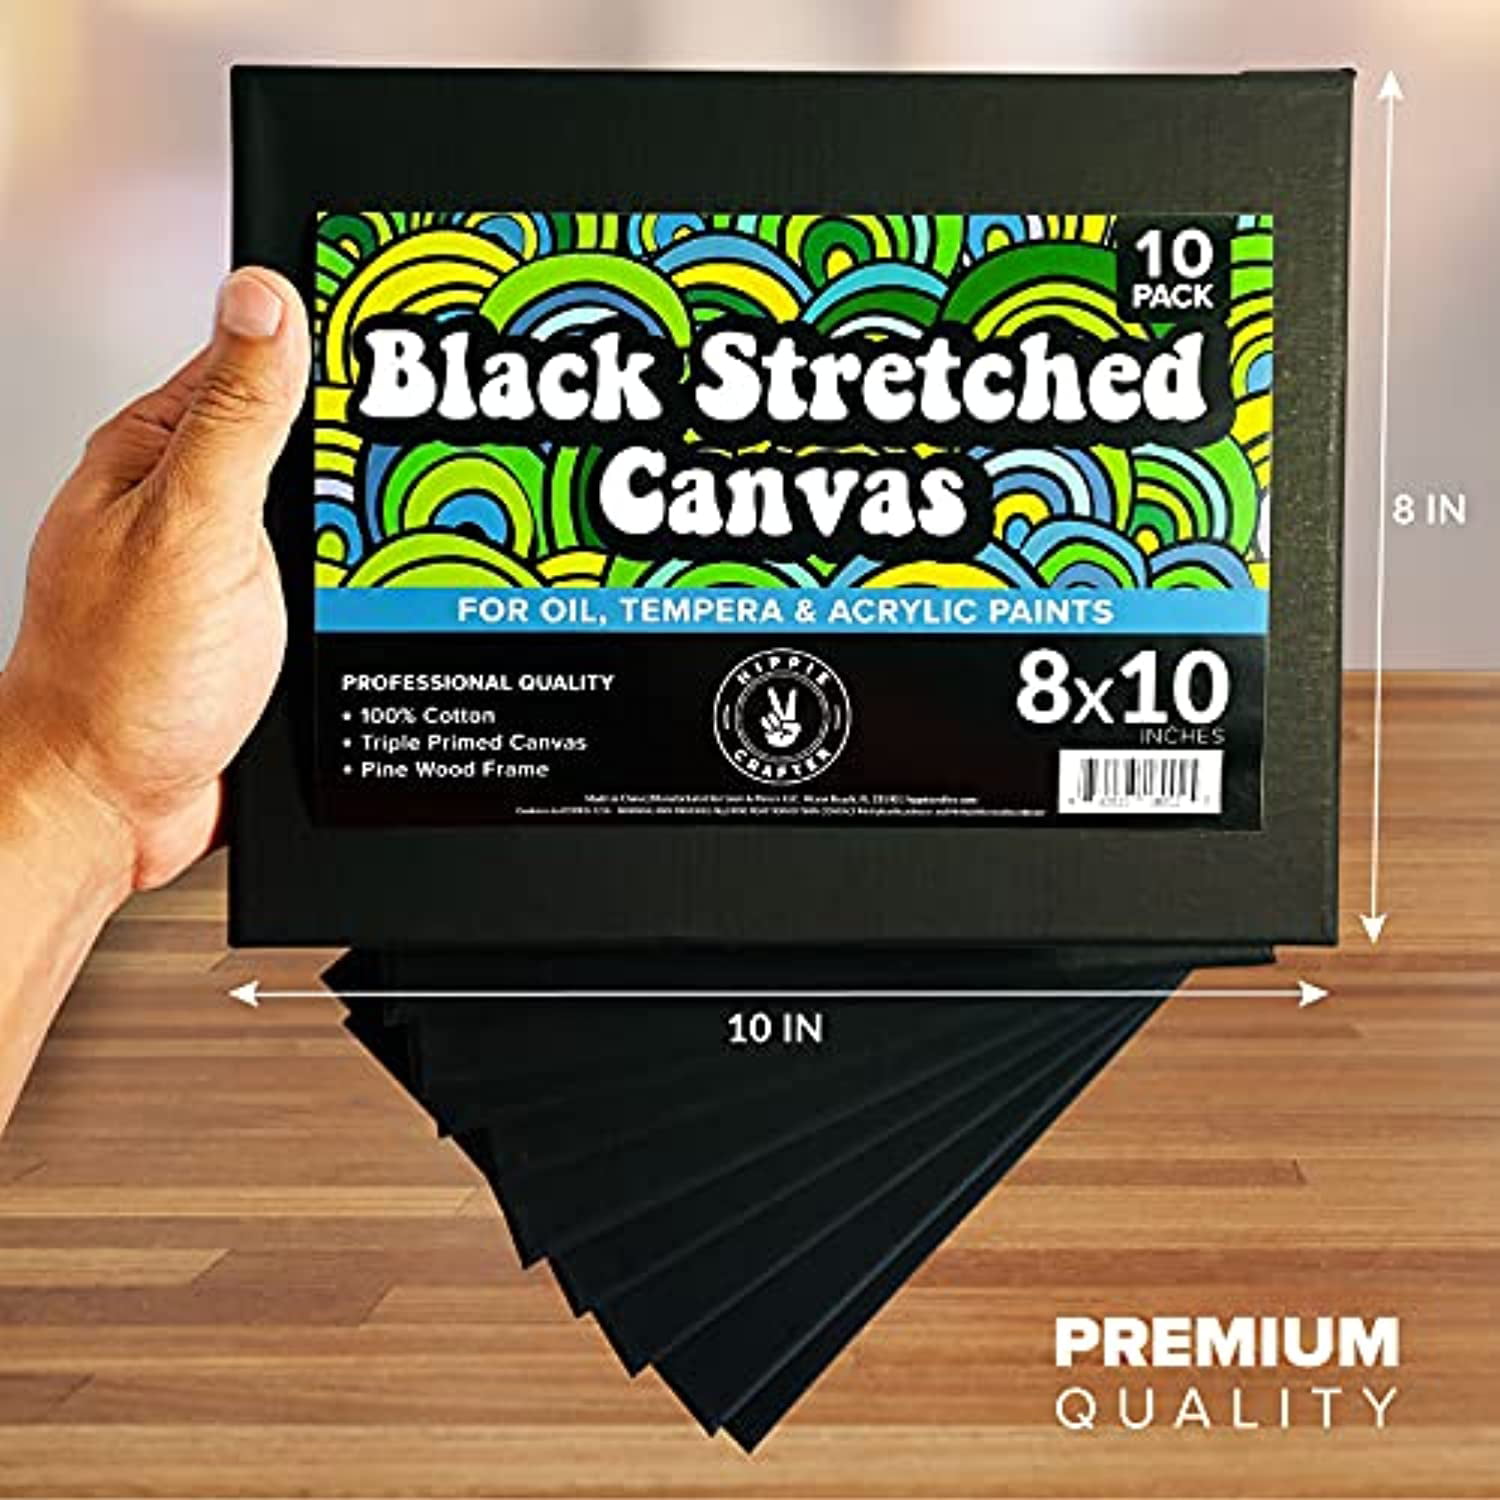 CONDA Black Canvases for Painting 11x14 inch, Pack of 14,100% Cotton  Acid-Free, Canvas Panels, 8 oz Gesso-Primed, Art Boards for Oil & Acrylic